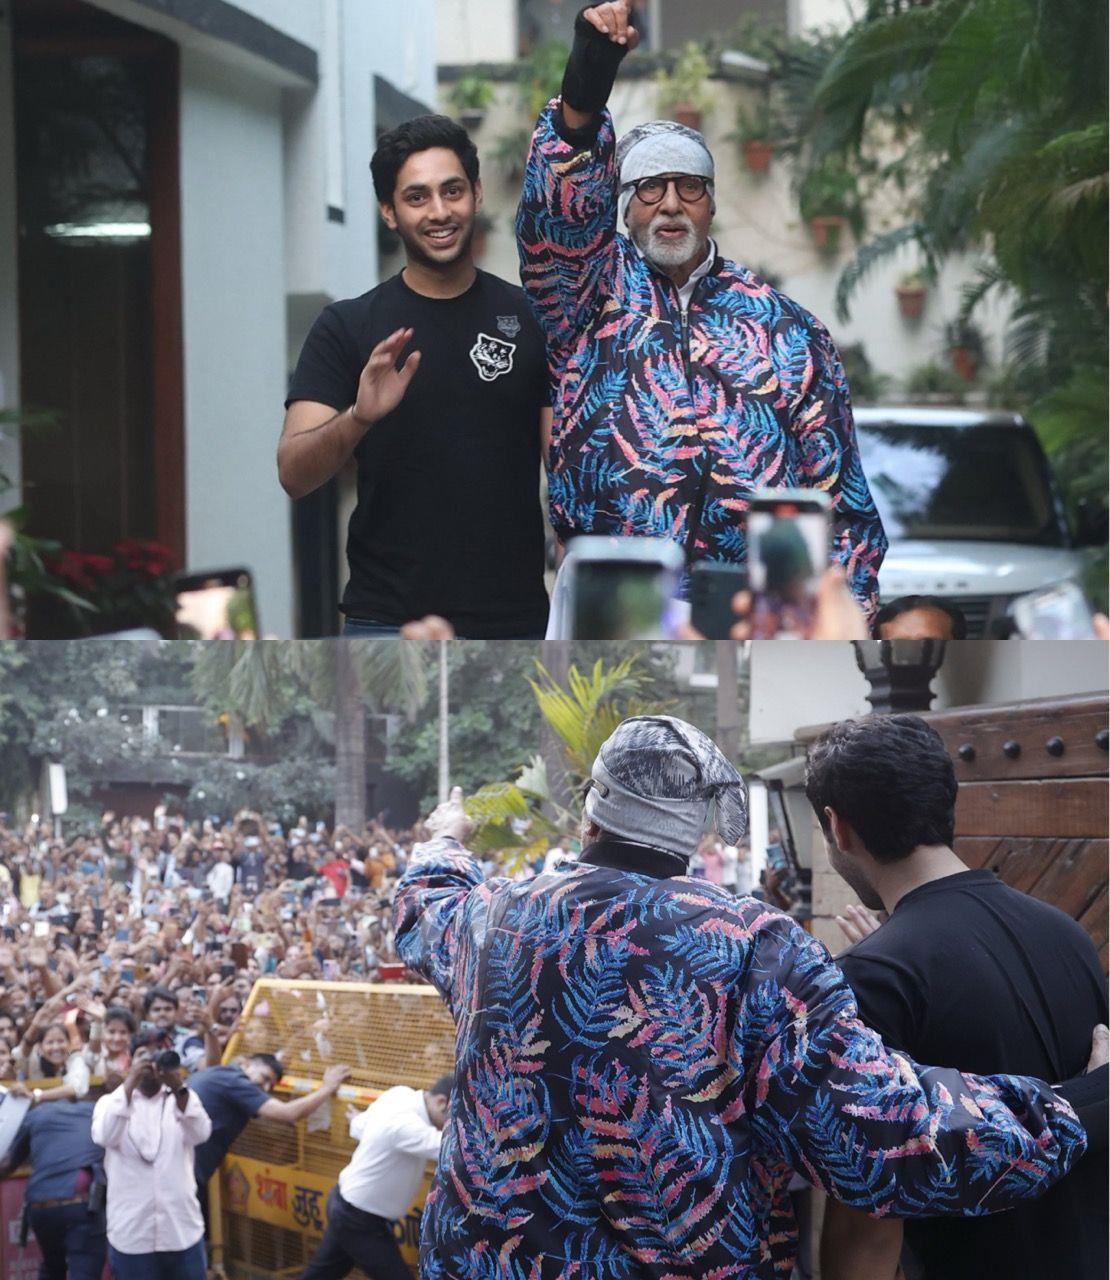 Amitabh Bachchan Joined By Agastya Nanda For Fan Meet Up At Jalsa